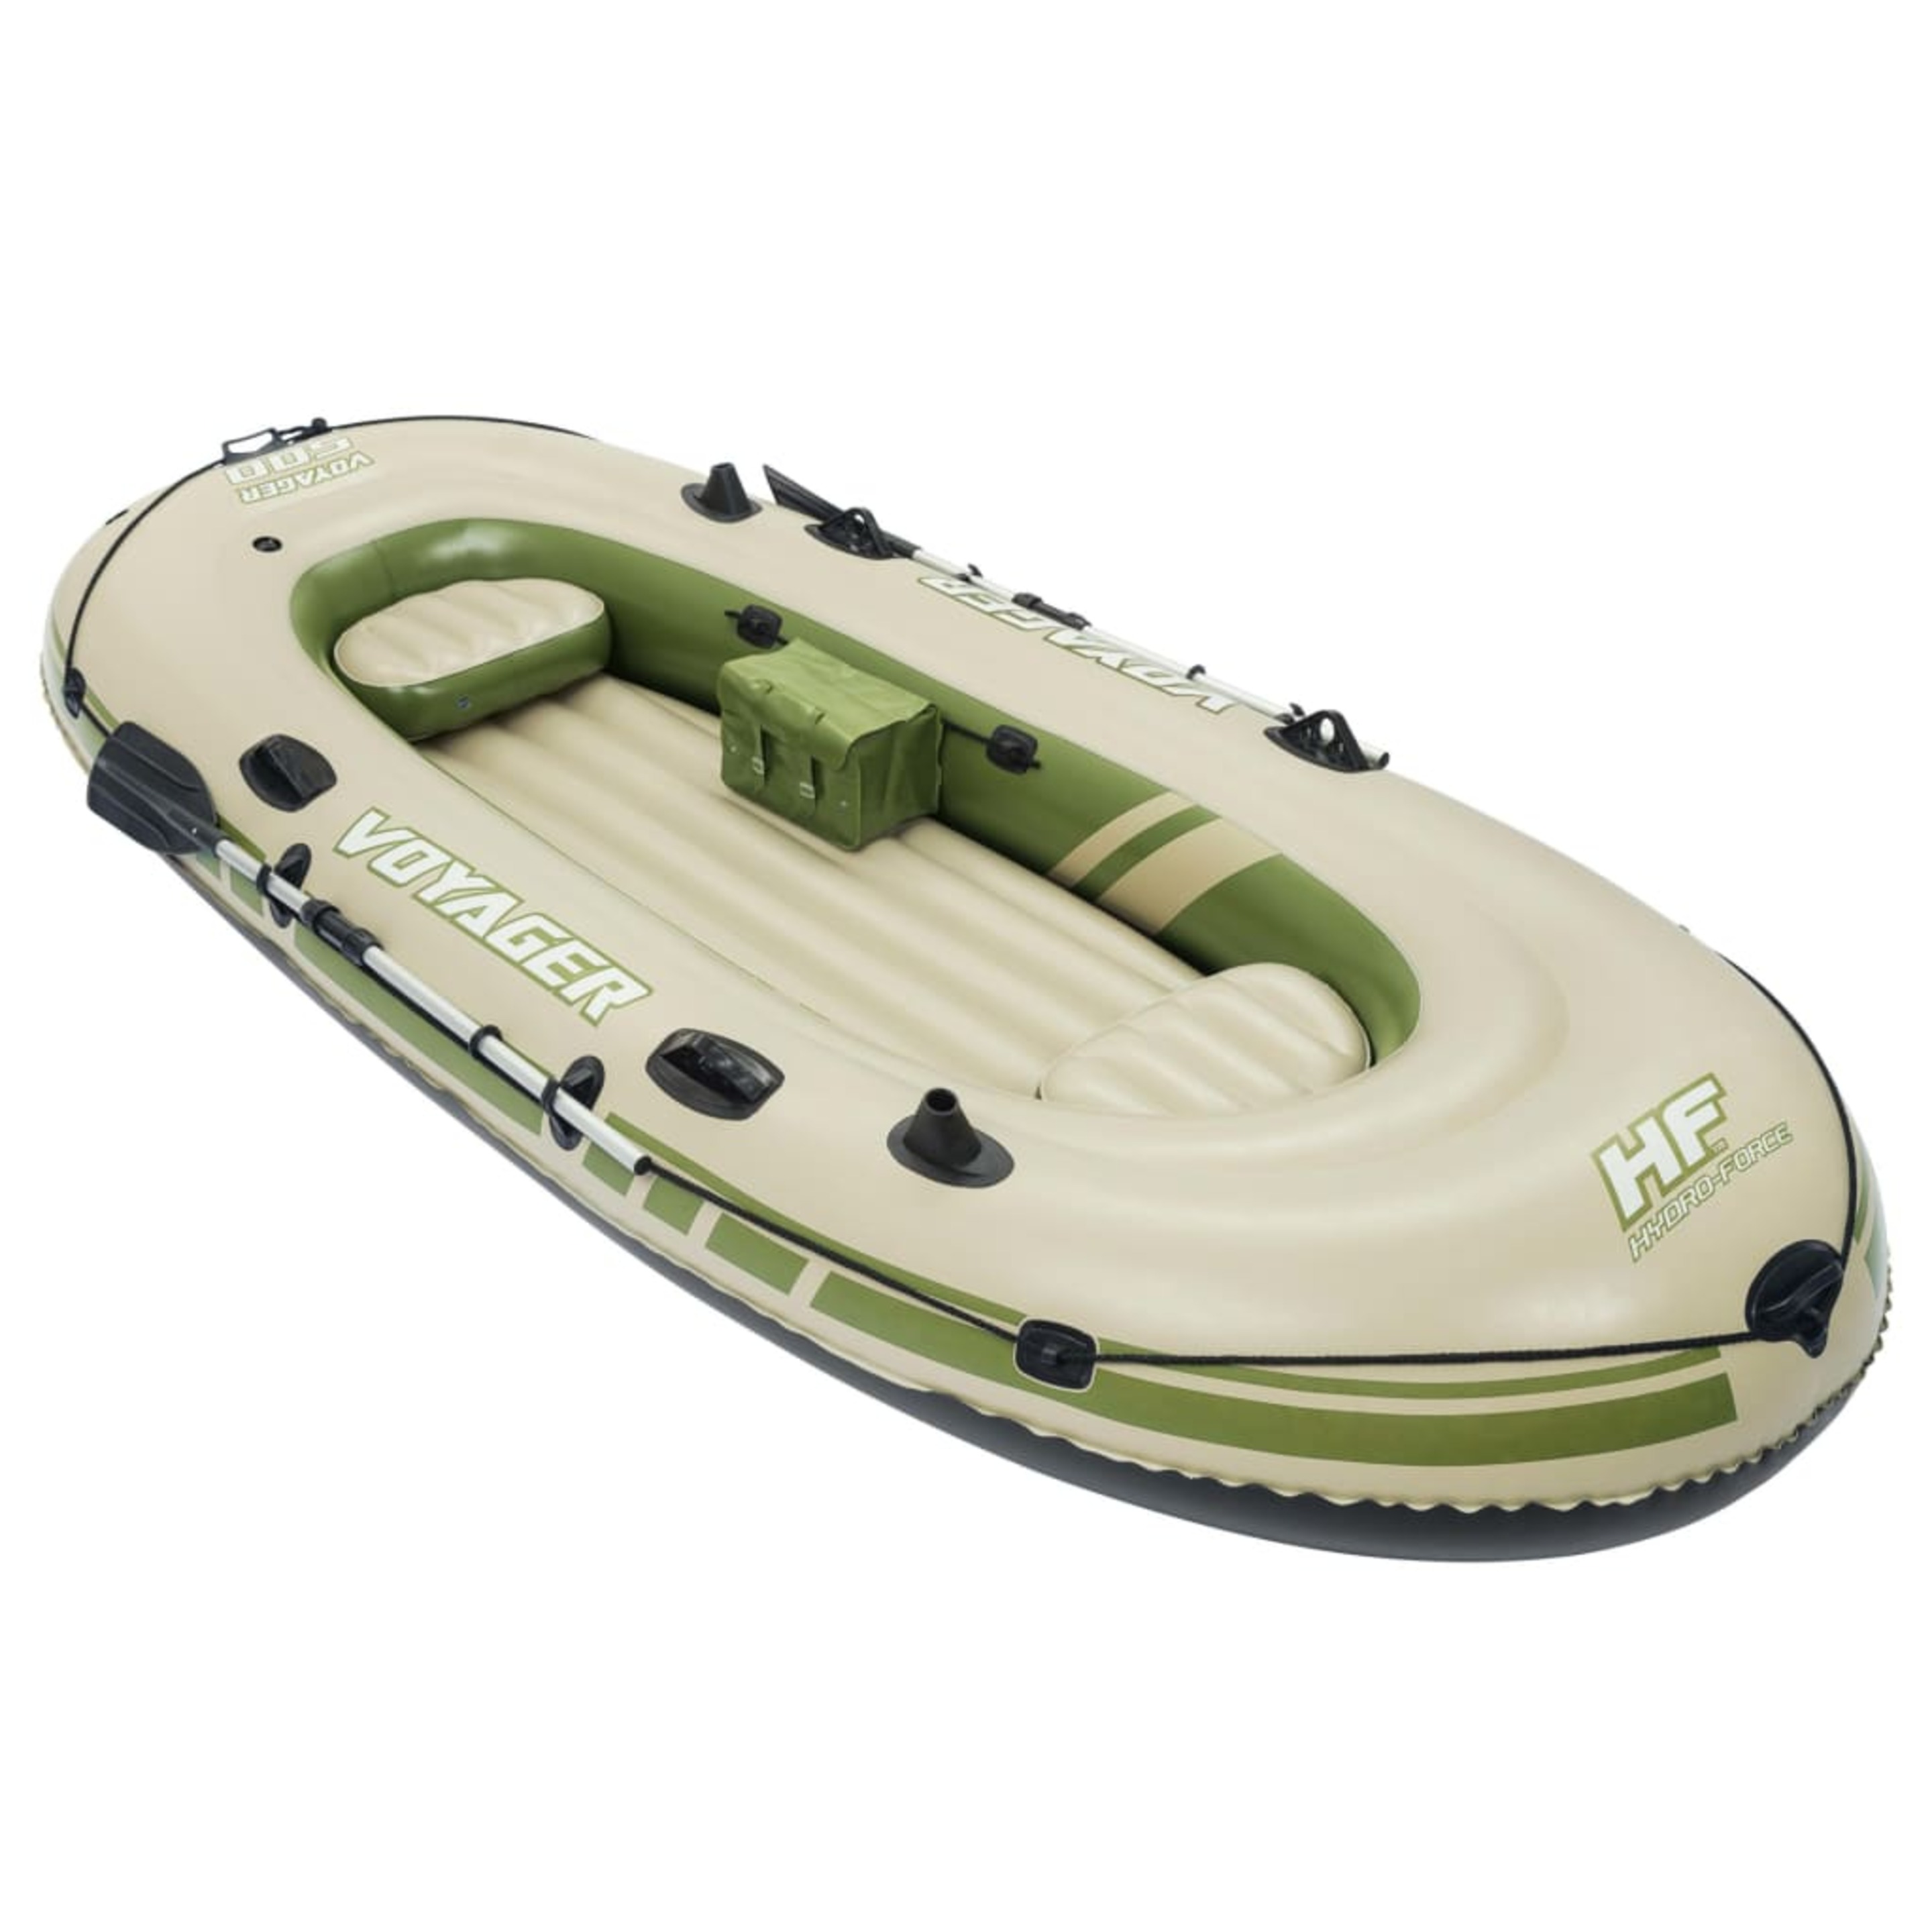 Bestway Hydro Force Barca Inflable Voyager 500 348x141 Cm